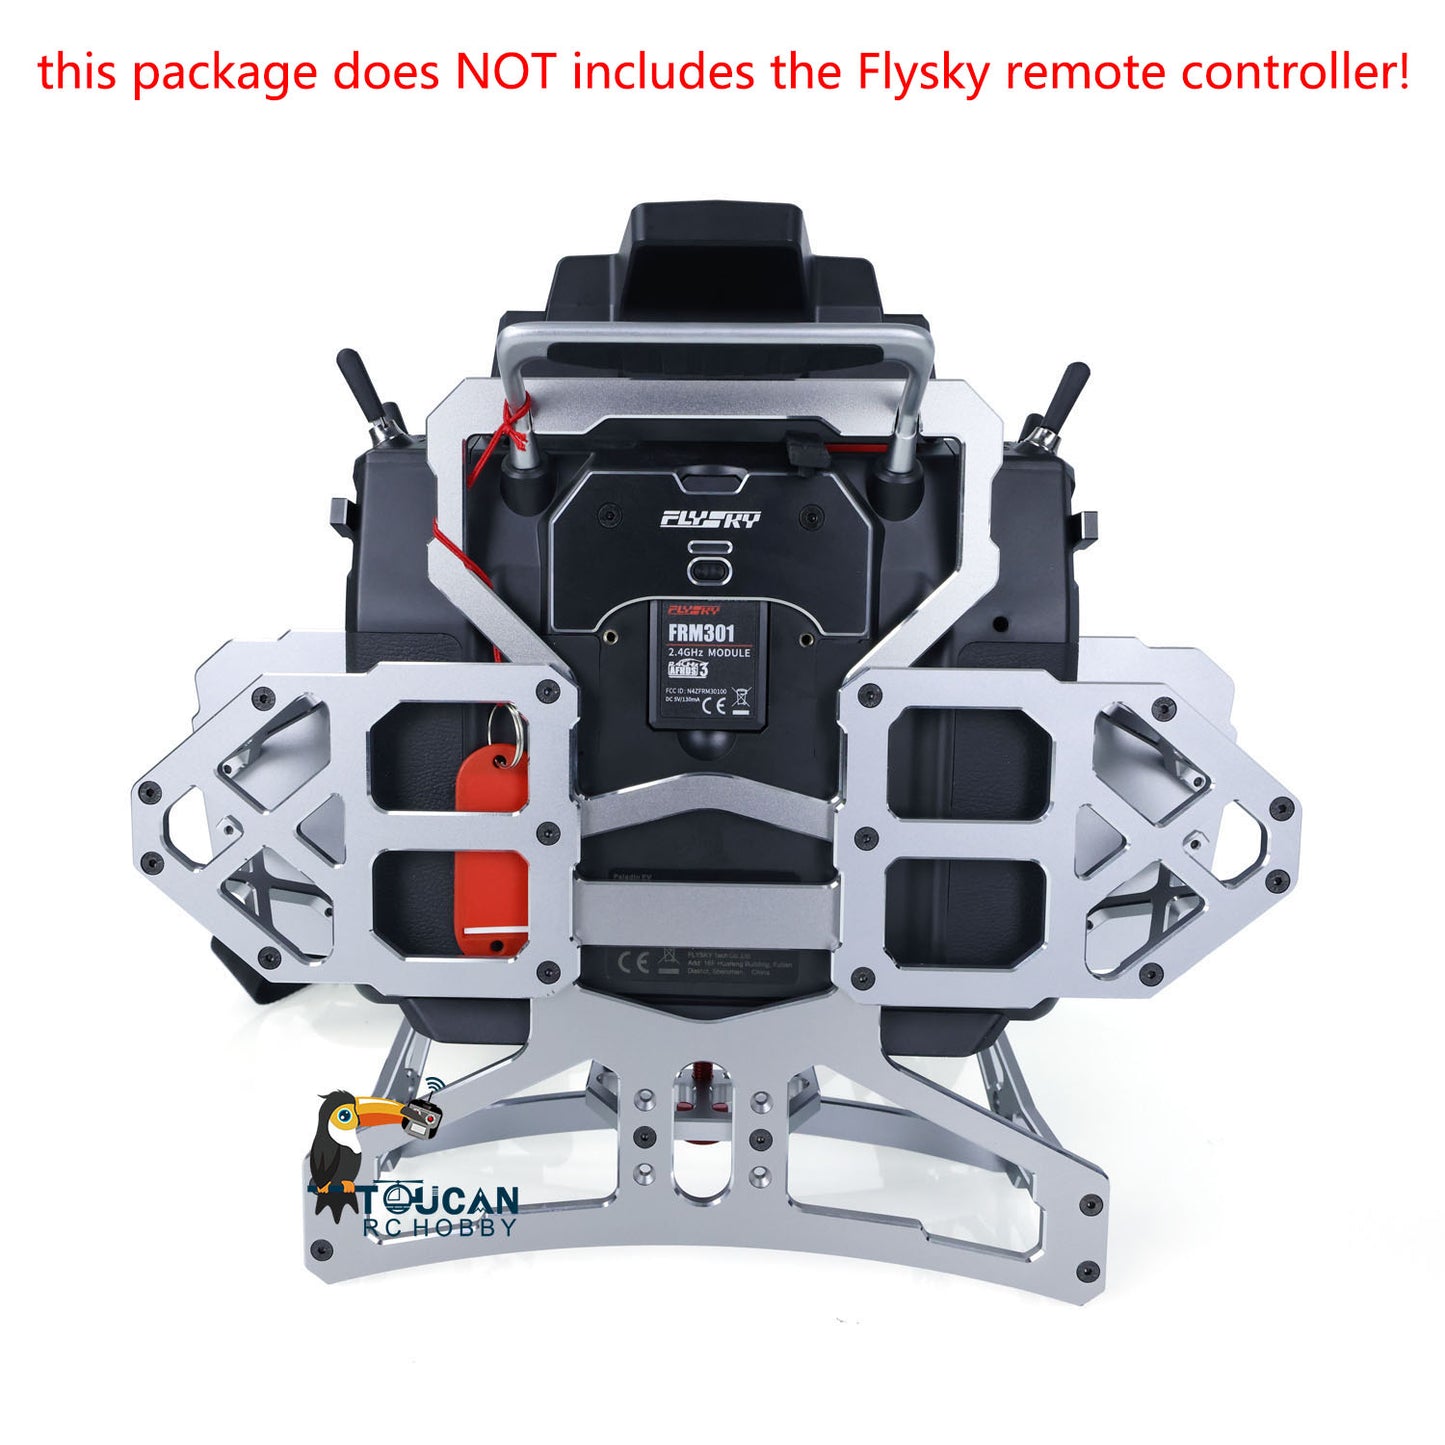 US STOCK Metal Tray Holder with Strap for Flysky Paladin PL18EV Remote Controller RC Universal Upgrade RC Model Accessory